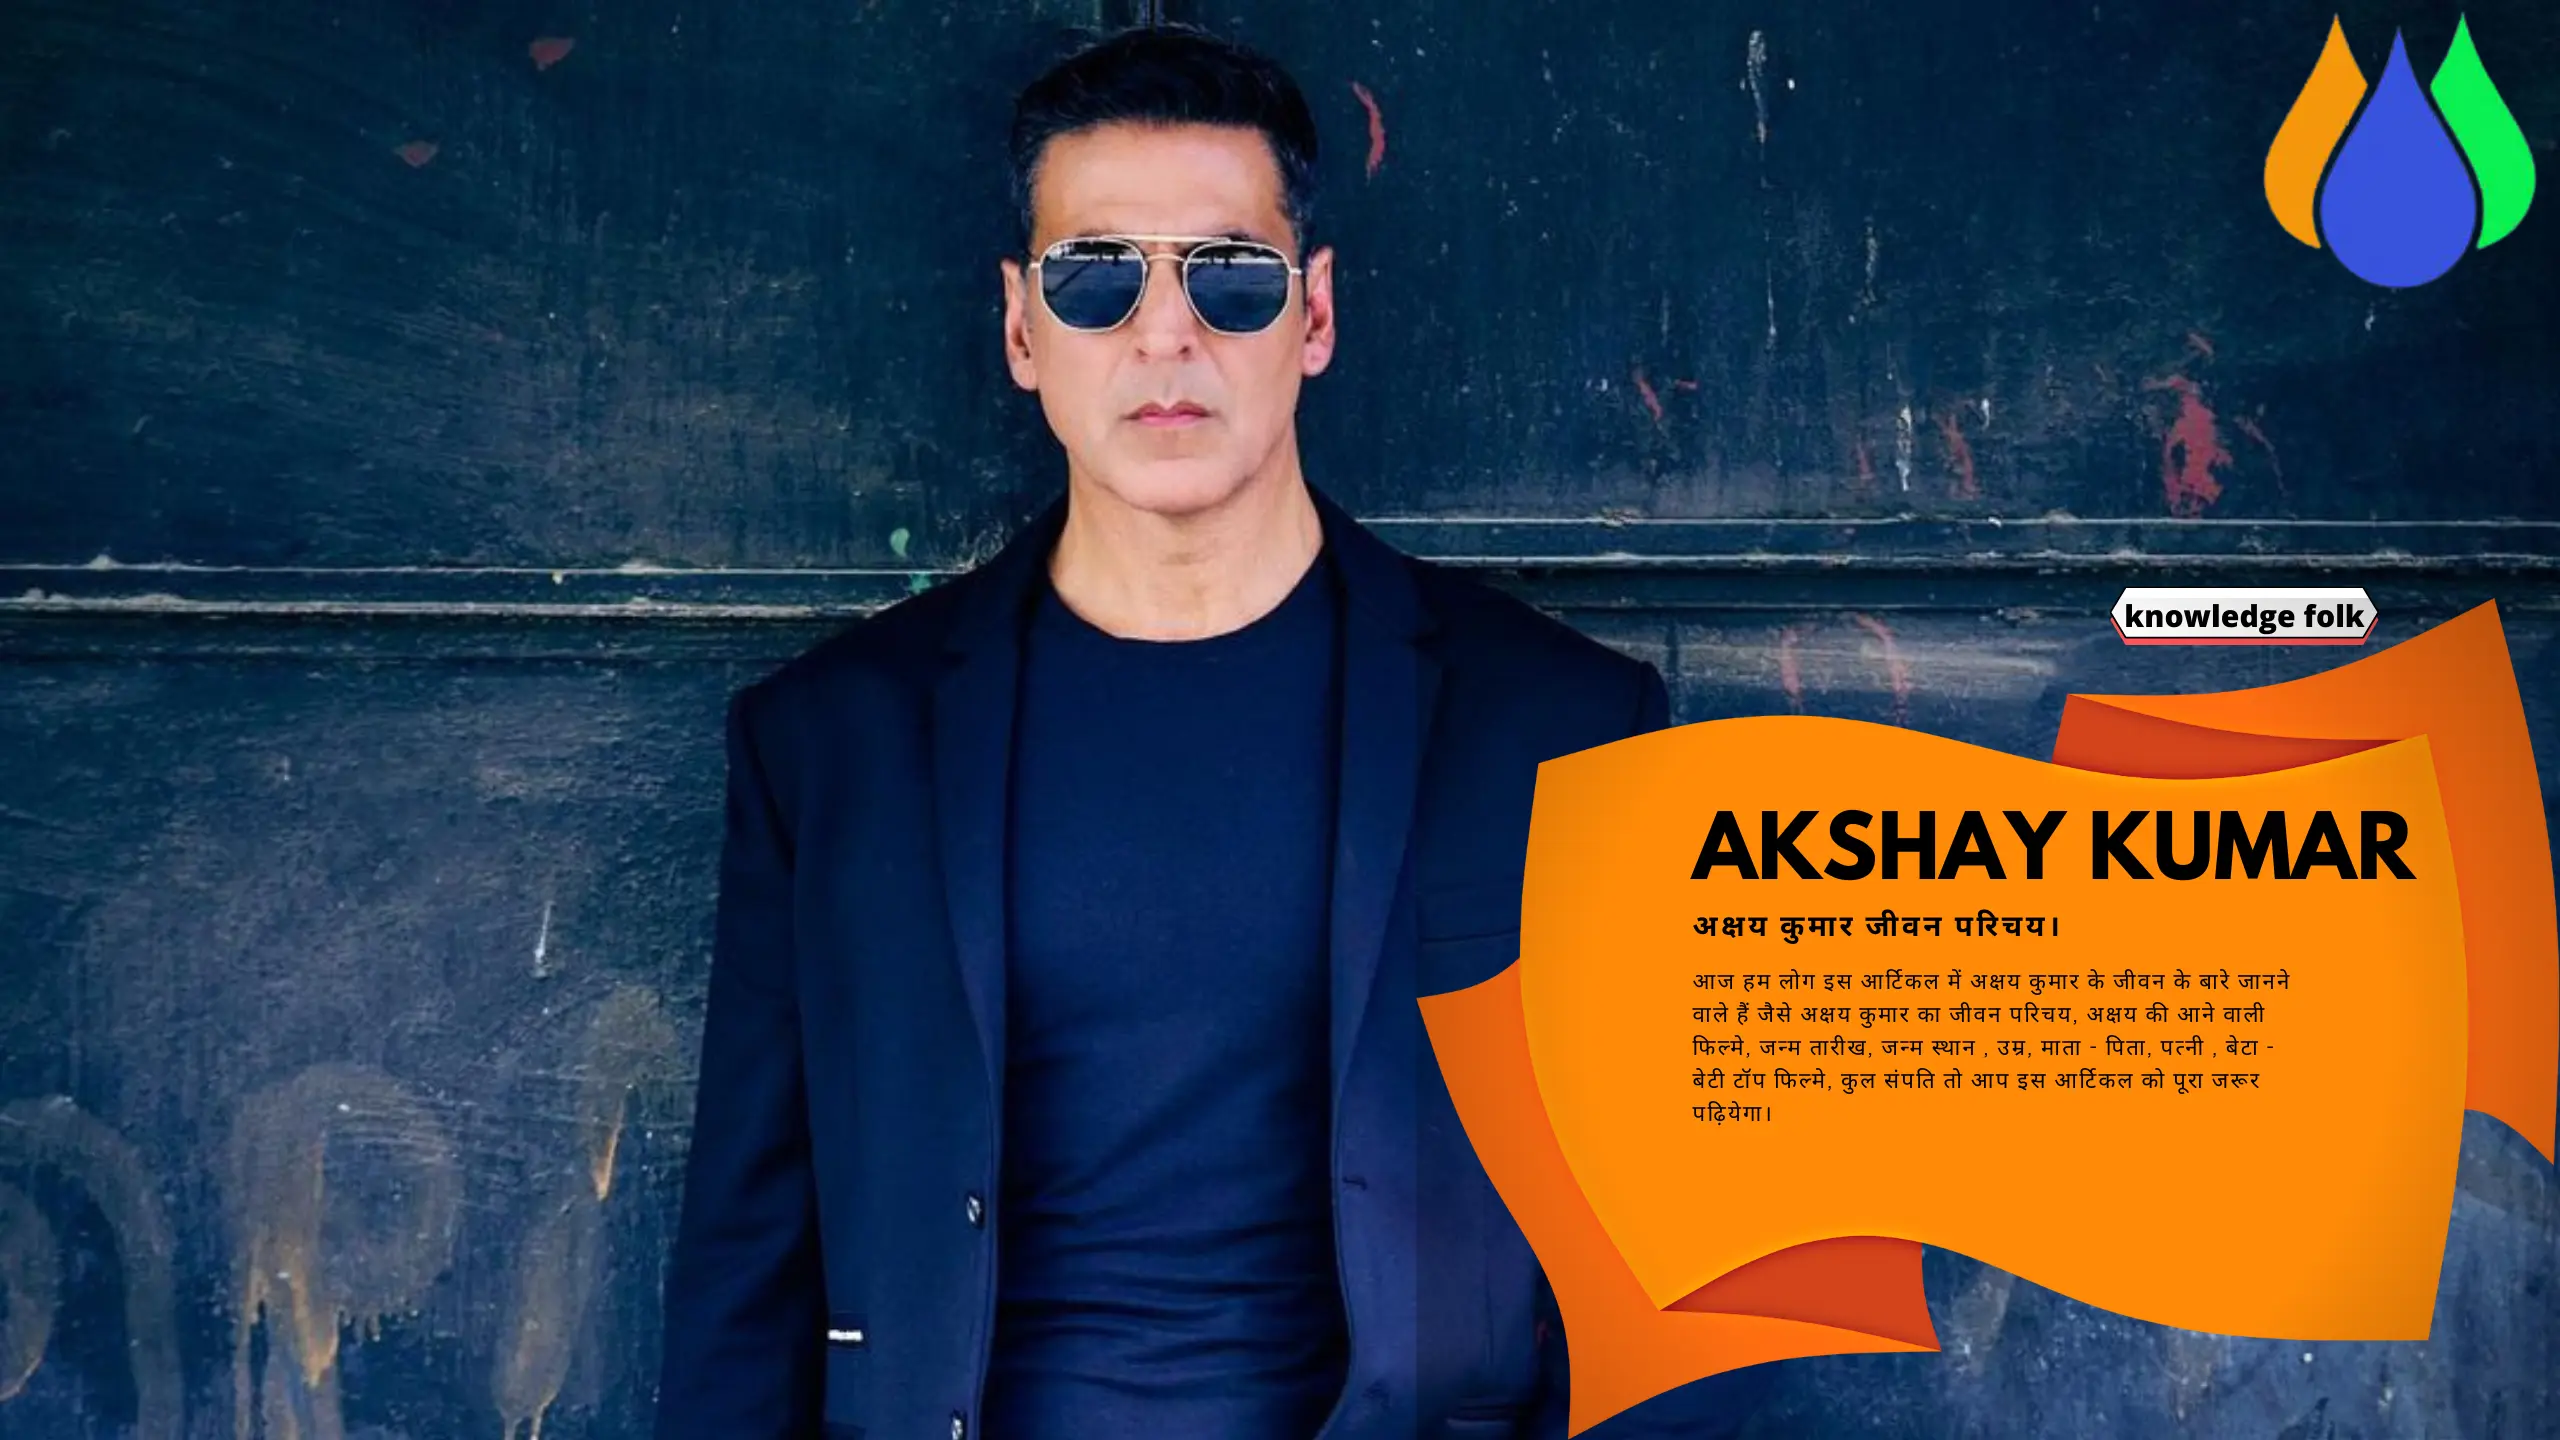 You are currently viewing Akshay Kumar Biography in Hindi। अक्षय कुमार जीवन परिचय। [ Akshay Kumar Biography, net worth, age, wife]